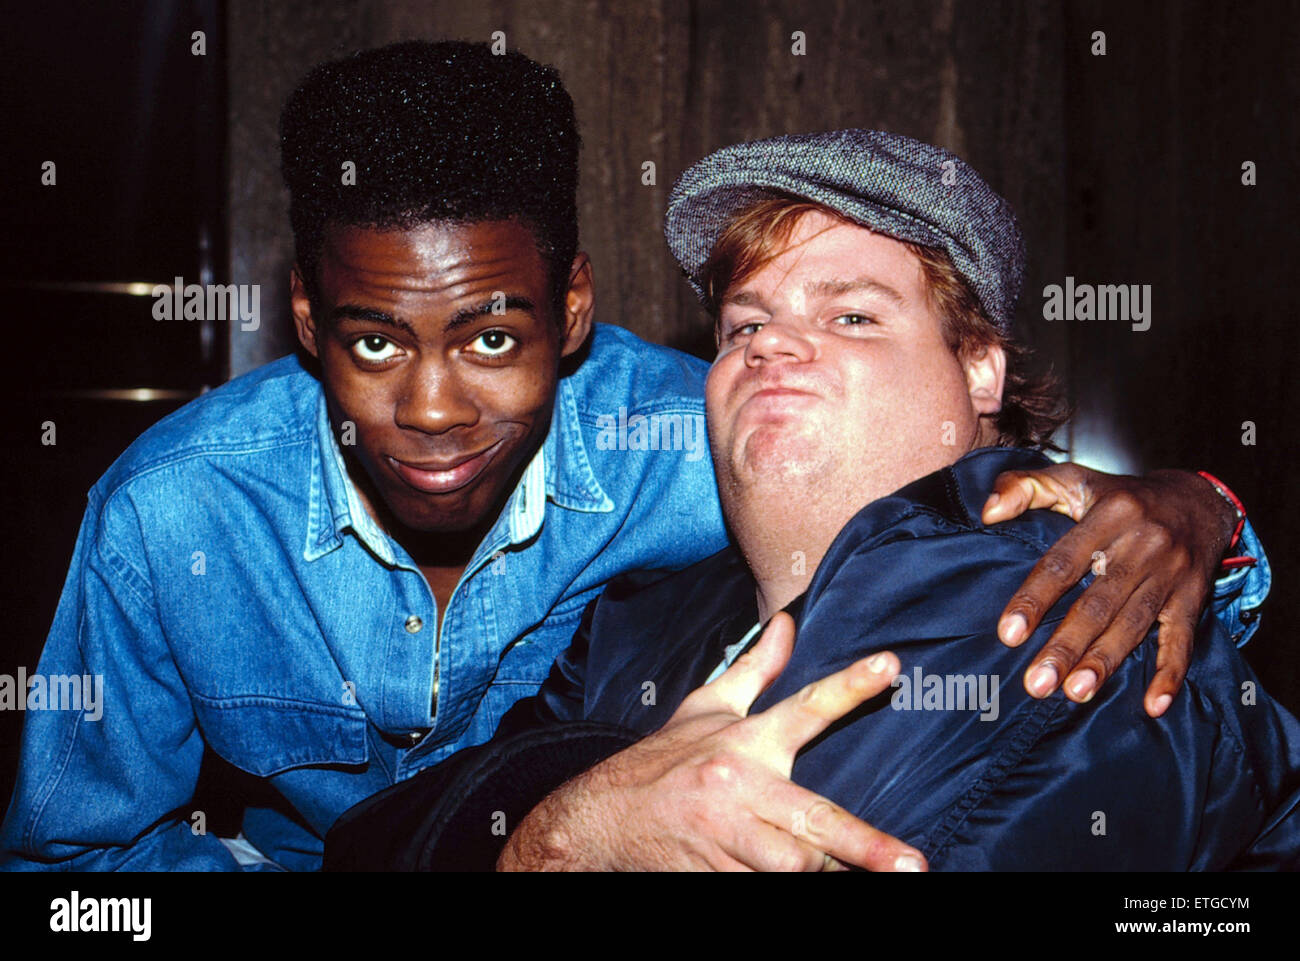 'Saturday Night Live' at the NBC Building - Departures  Featuring: Chris Rock, Chris Farley Where: New York, United States When: 28 Oct 1990 Credit: Joseph Marzullo/WENN.com Stock Photo